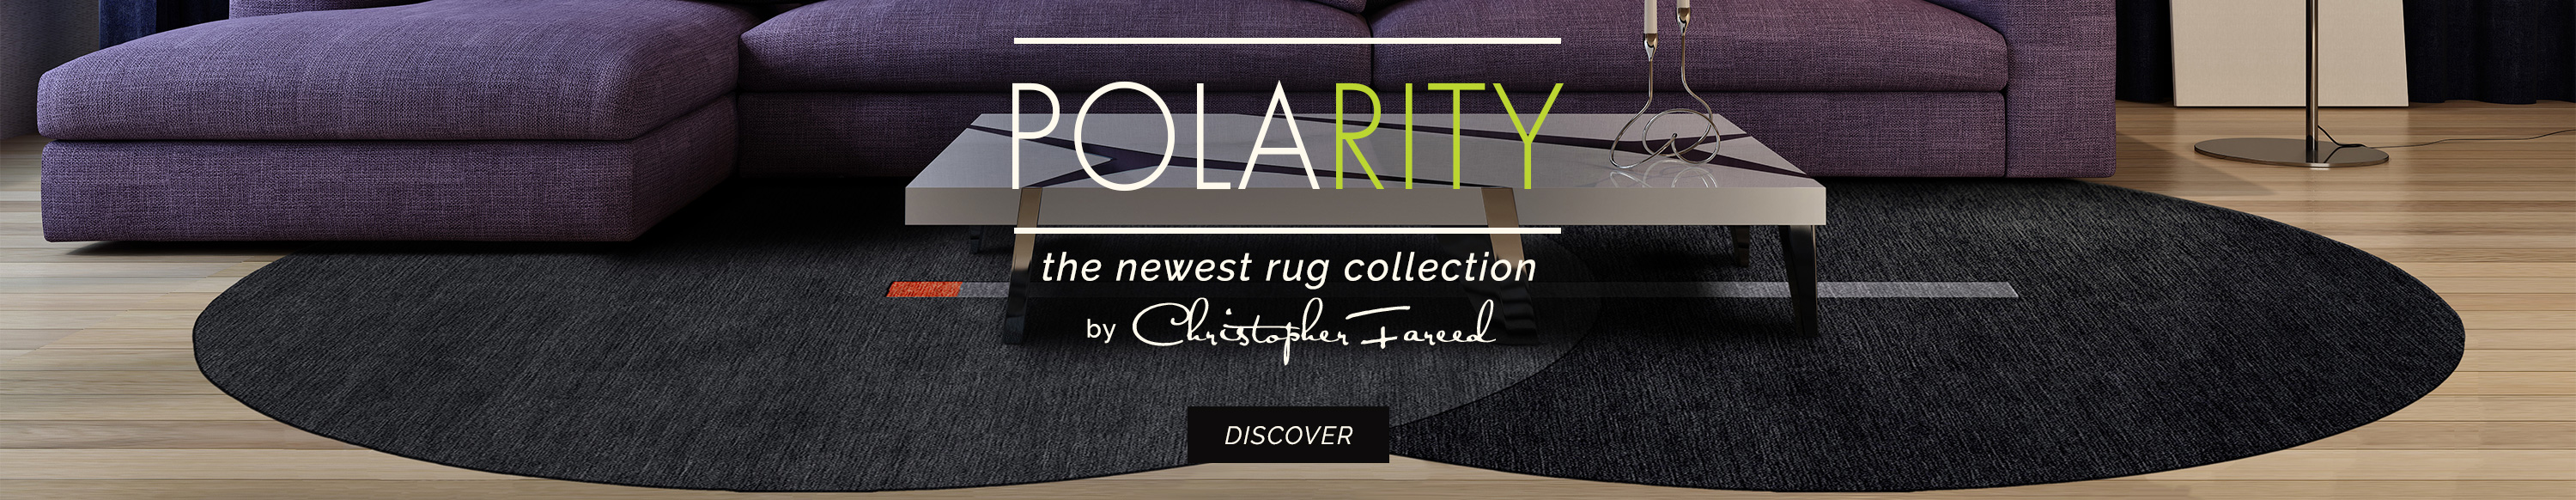 Discover Polarity: the newest collection of luxurious odd shaped area rugs from designer Christopher Fareed. This beautifully modern collection is fully customizable and woven by hand using artisan techniques. Experience the rug collection.